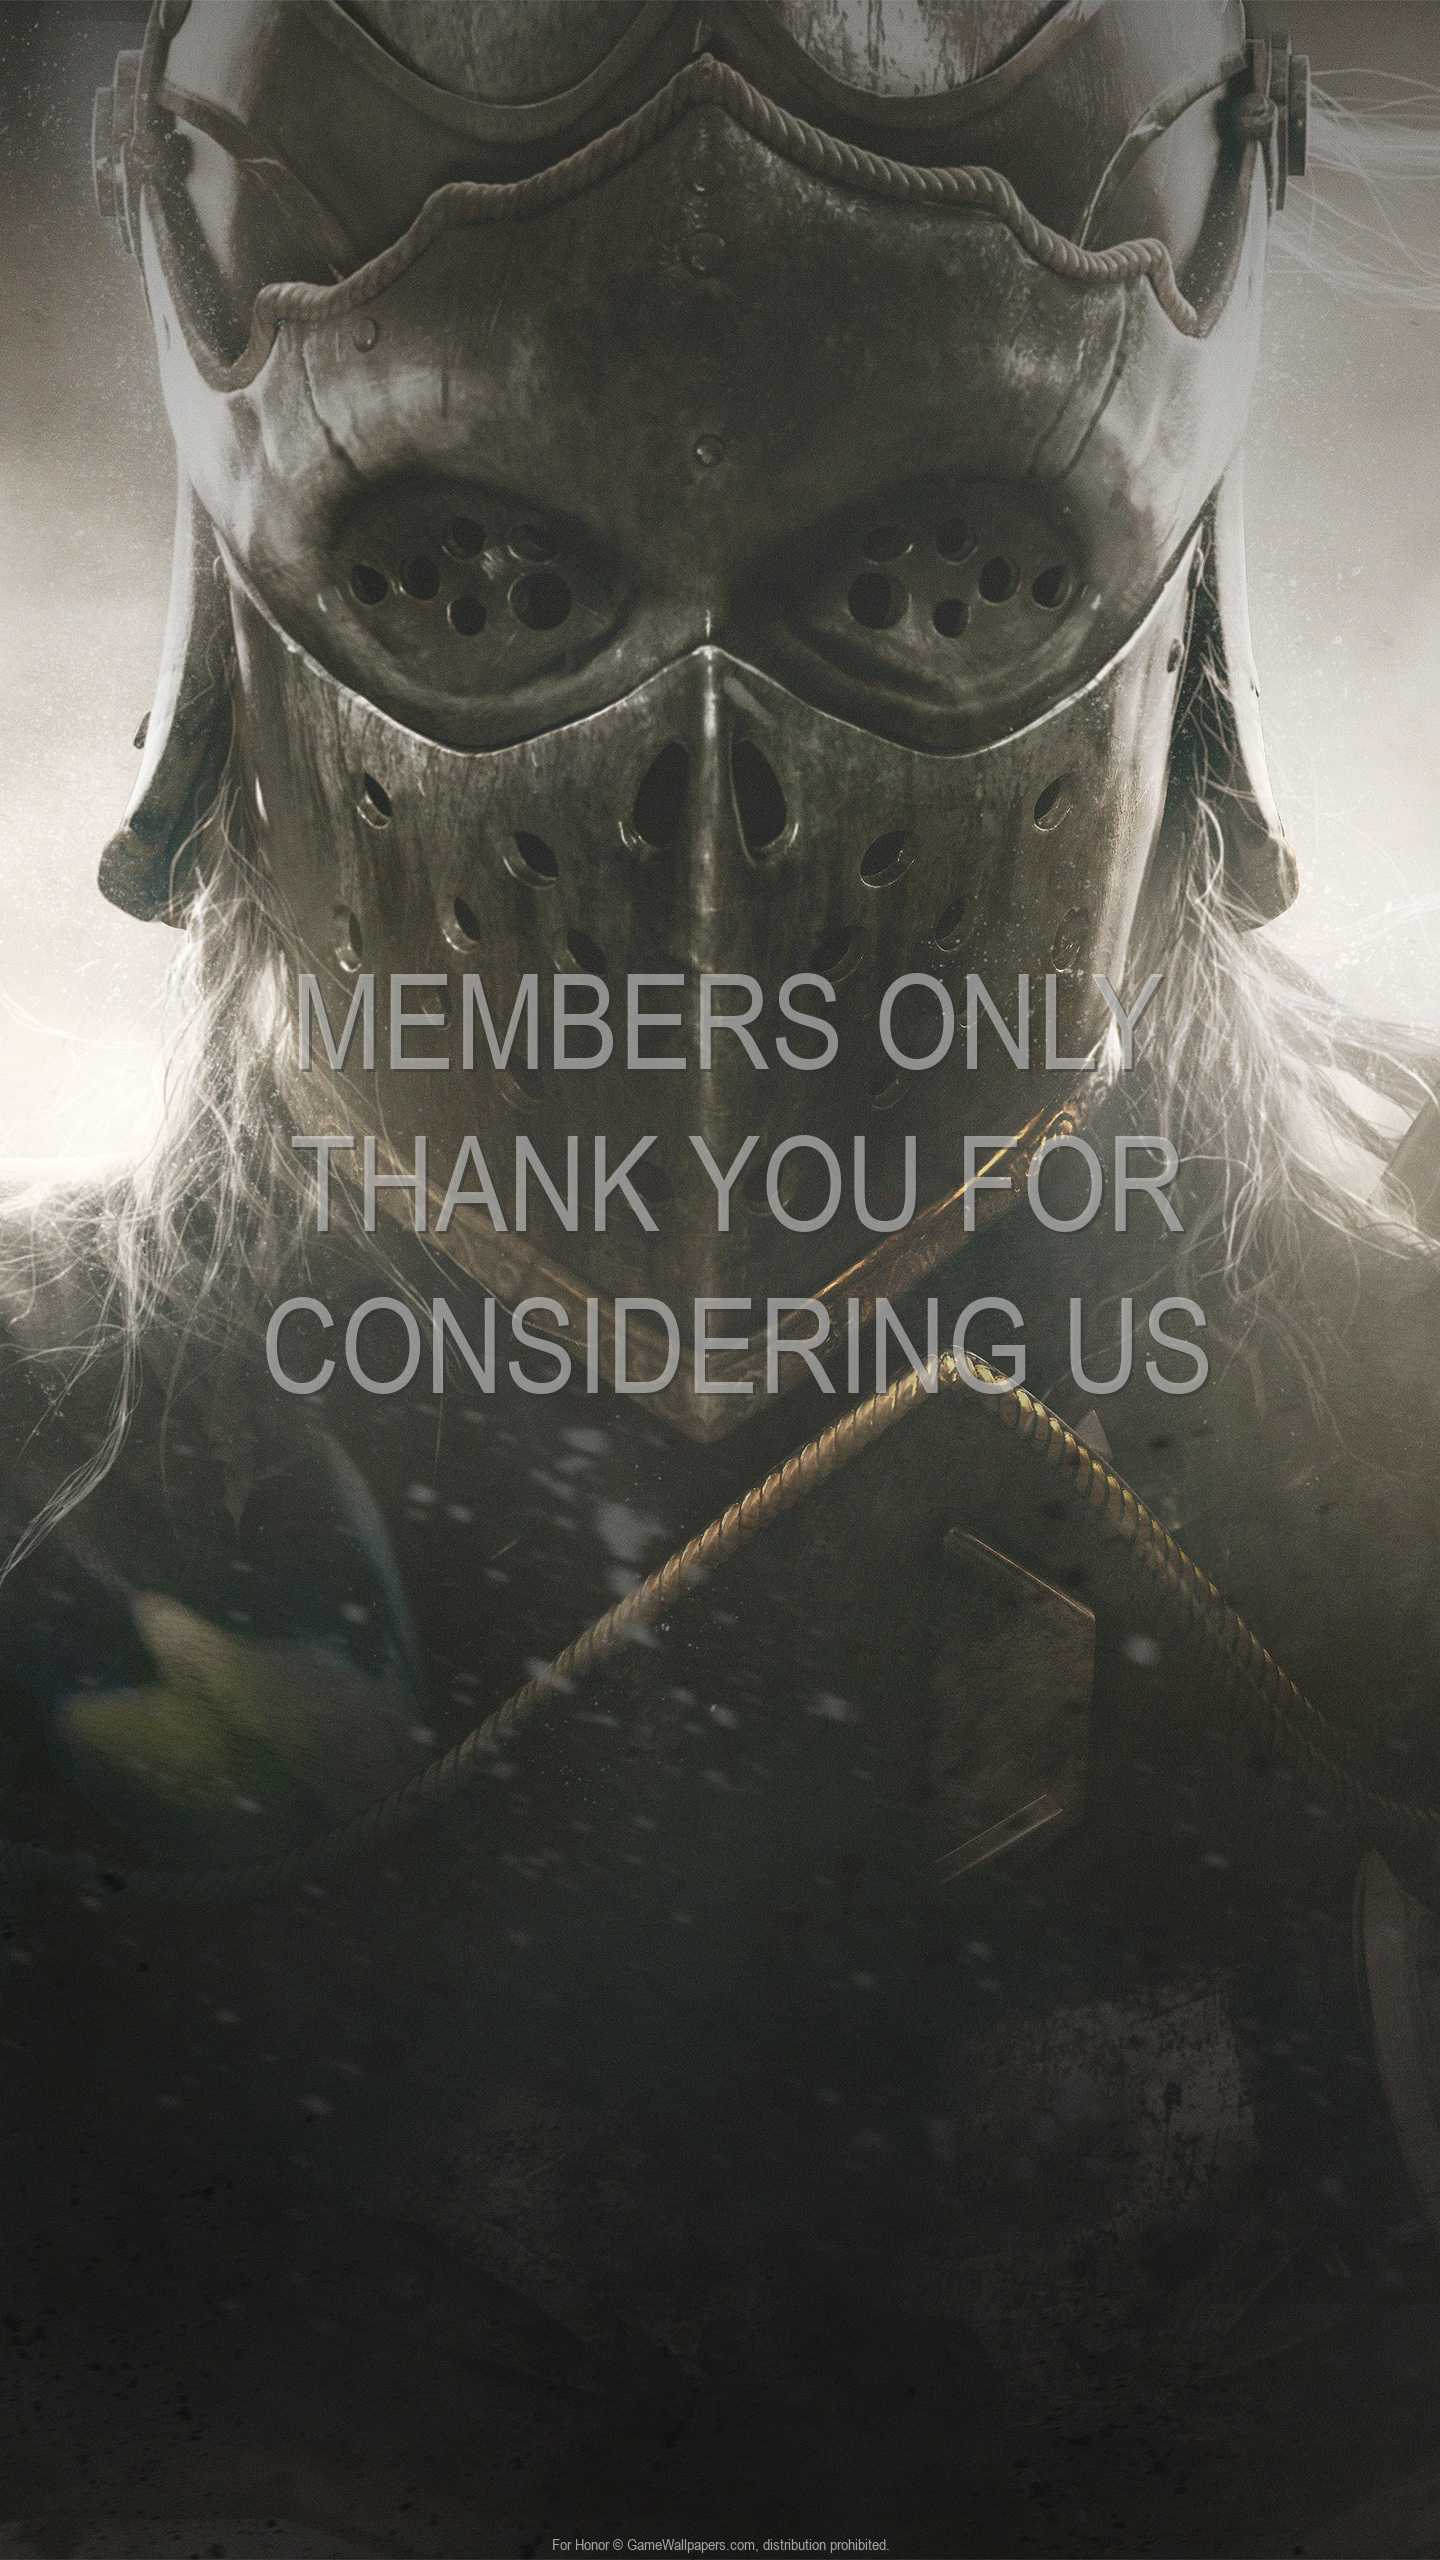 For Honor 1440p%20Vertical Mobile wallpaper or background 06